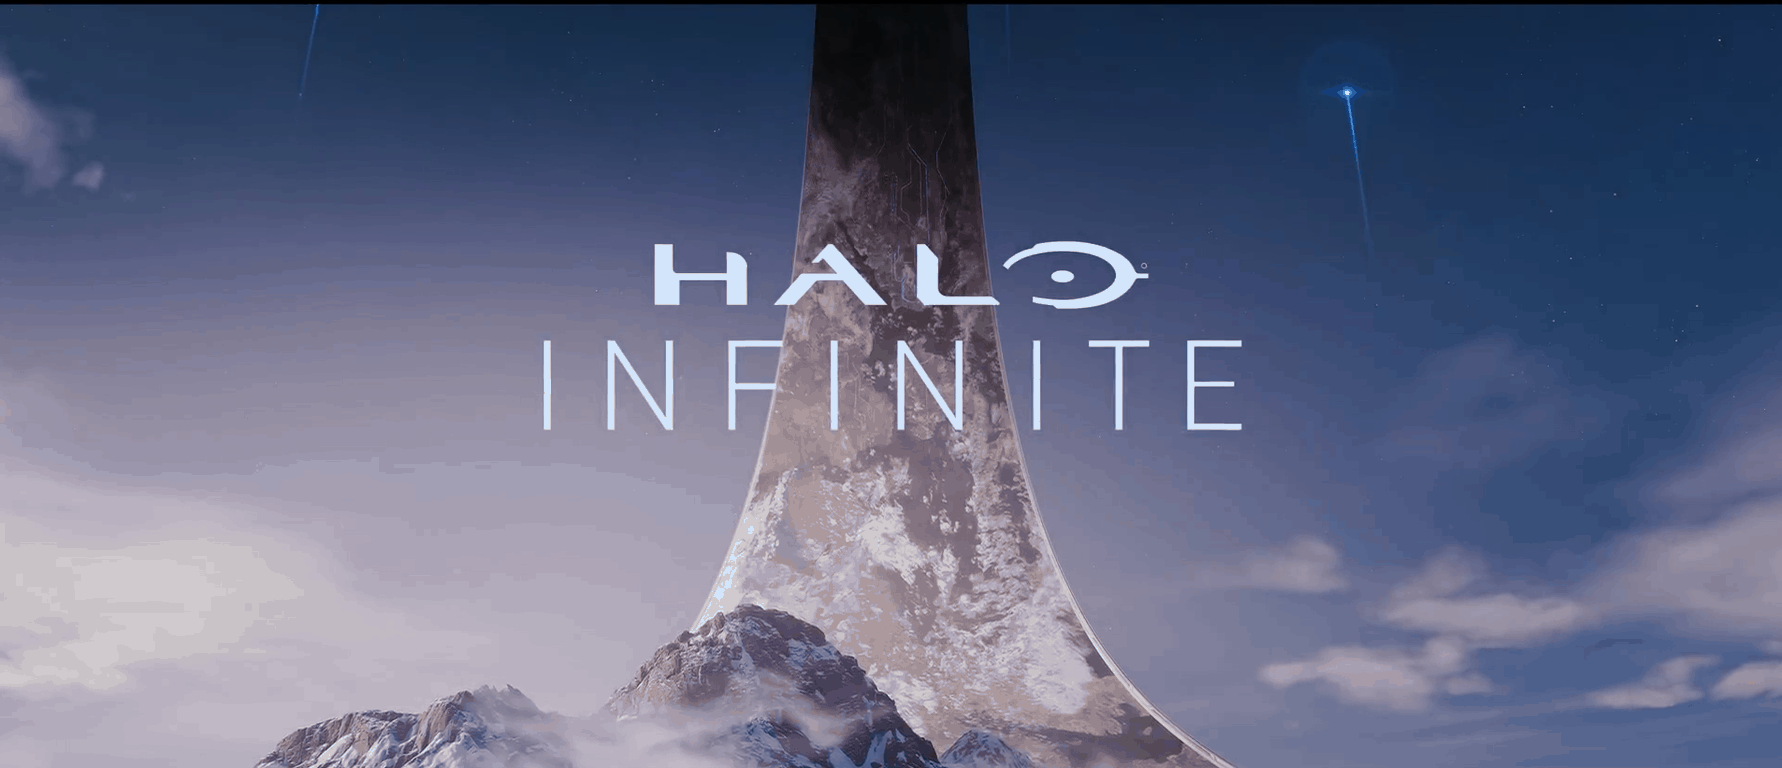 Halo Infinite won’t treat Xbox One as “second-class citizen,” 343 Industries says - OnMSFT.com - August 6, 2019